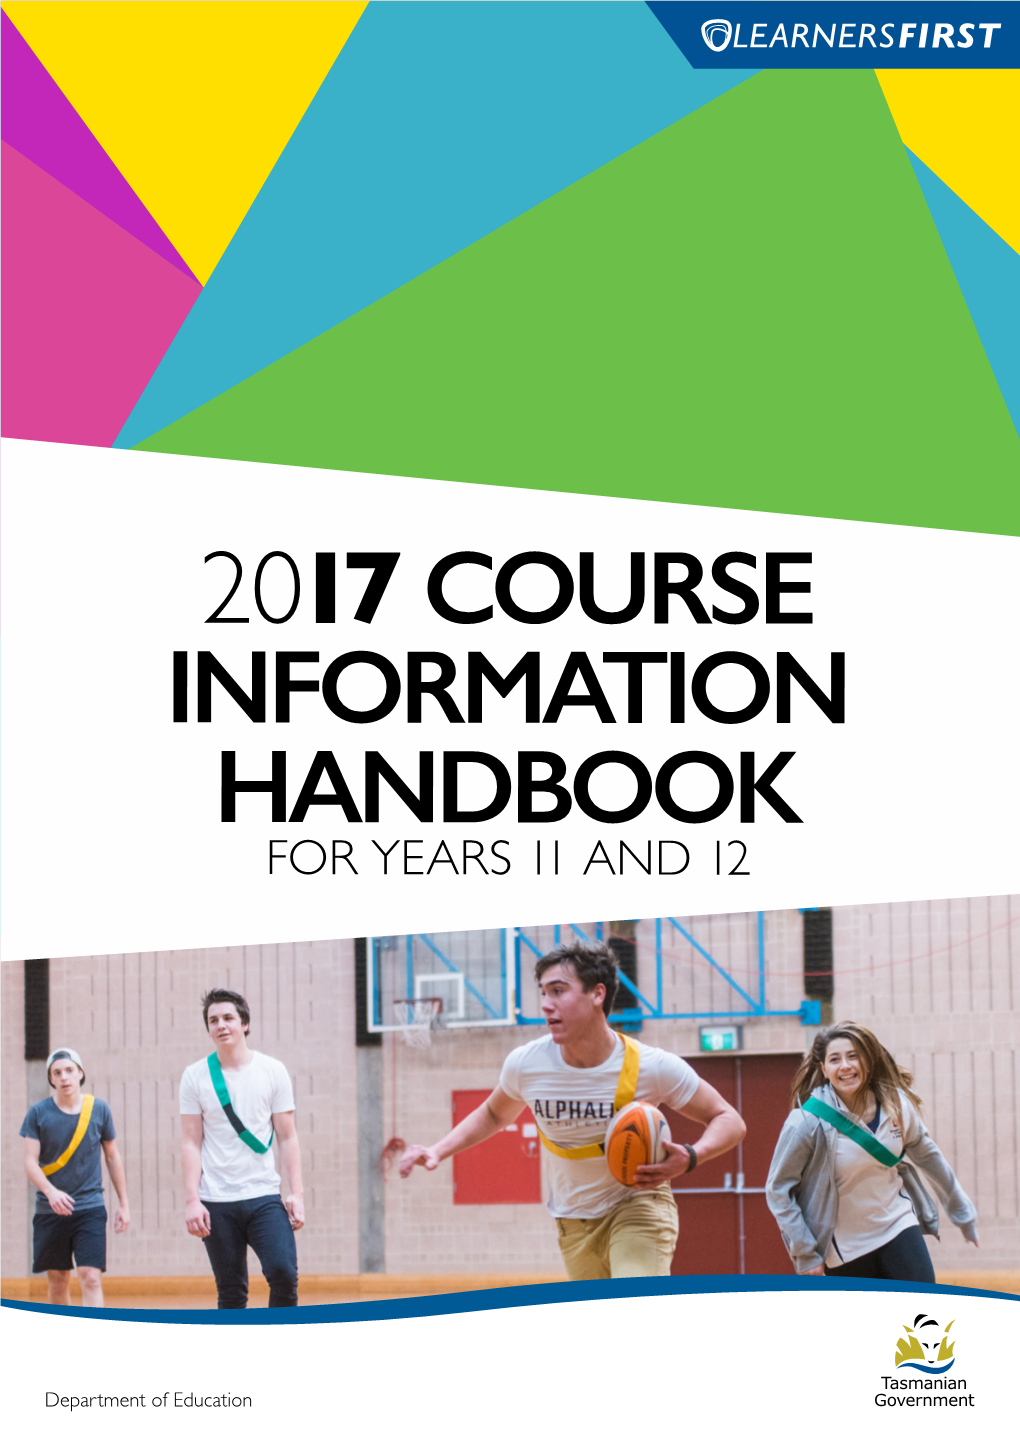 2017 Course Information Handbook for Years 11 and 12